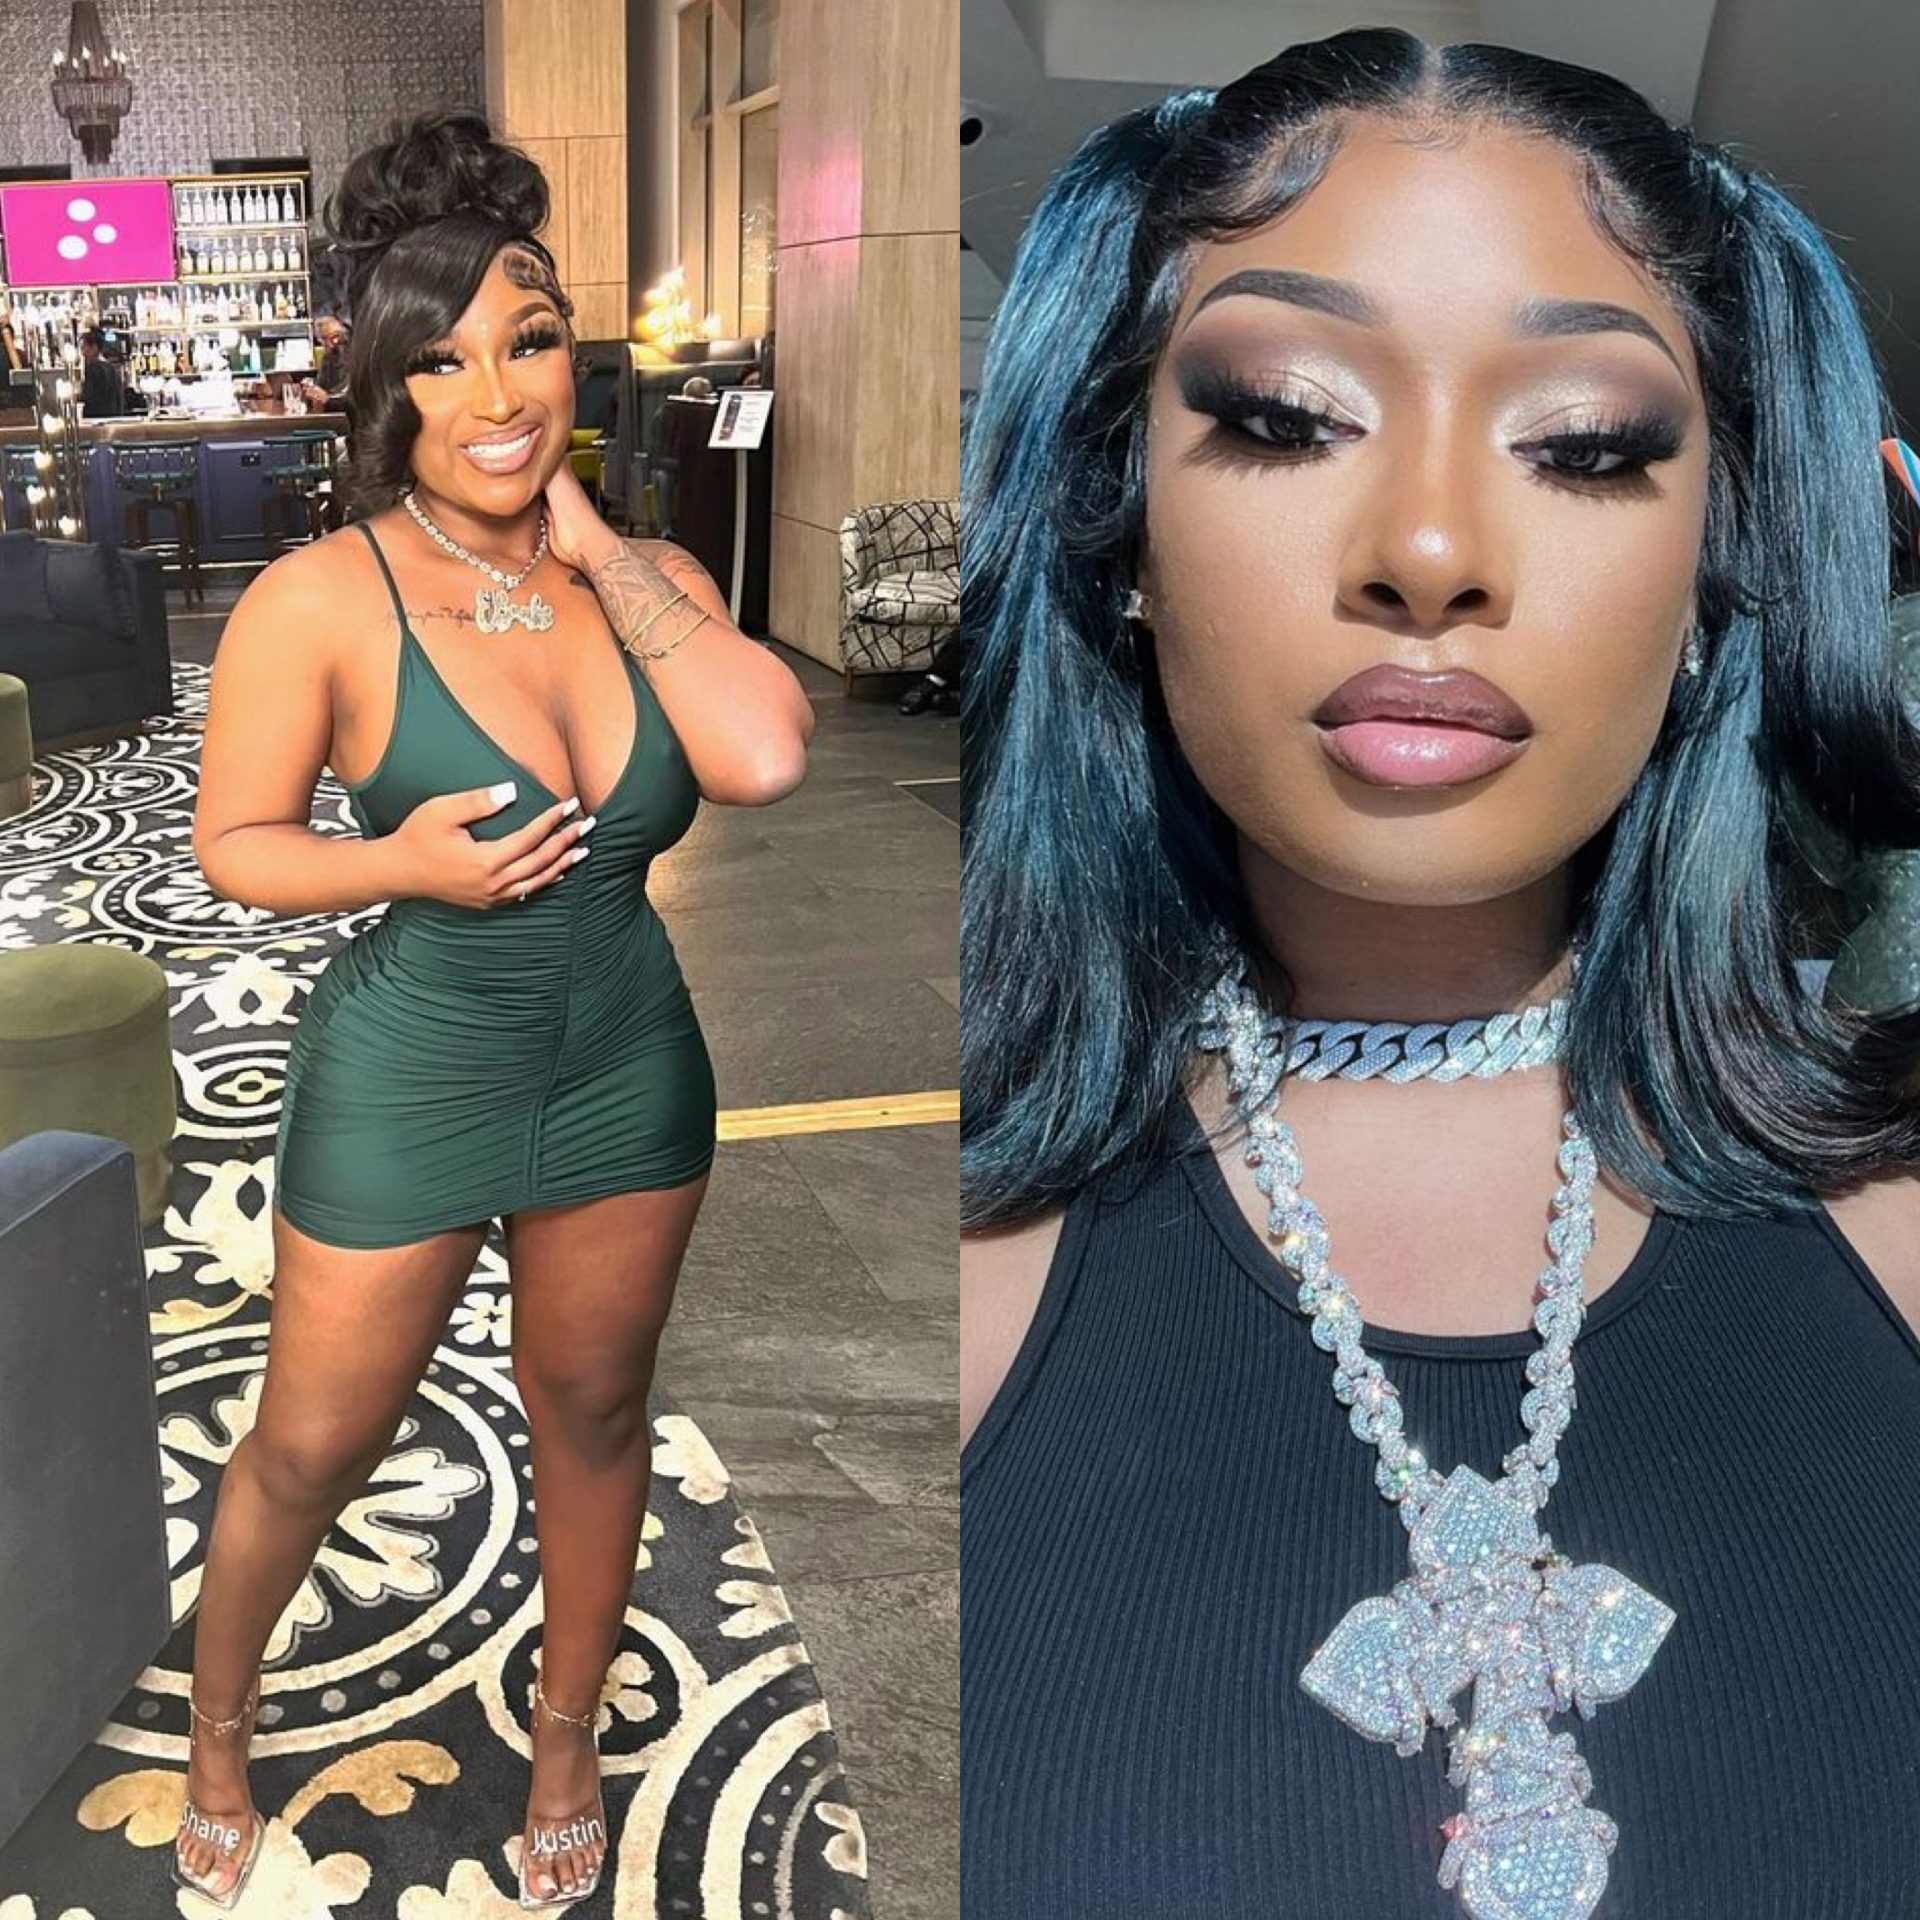 People Online Call Out Erica Banks For Copying Megan Thee Stallion’s ‘Thot S**t’ Music Video